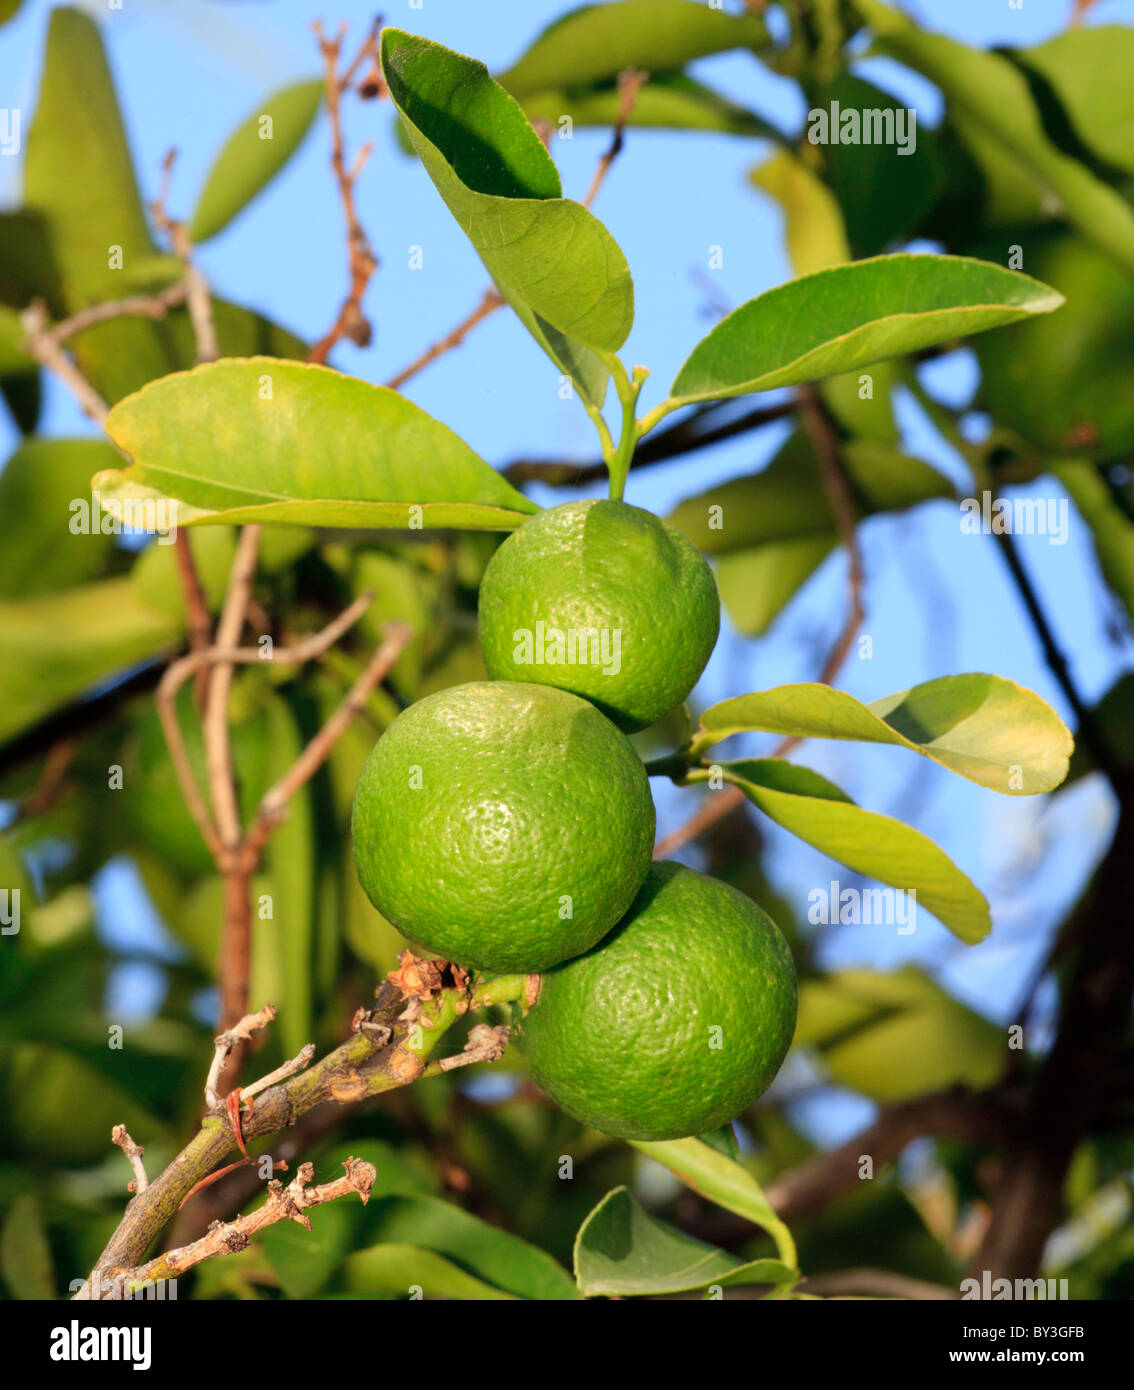 Tahitian limes (Citrus latifolia). Also known as the Persian Lime, Tahiti lime and Bearss lime. Stock Photo